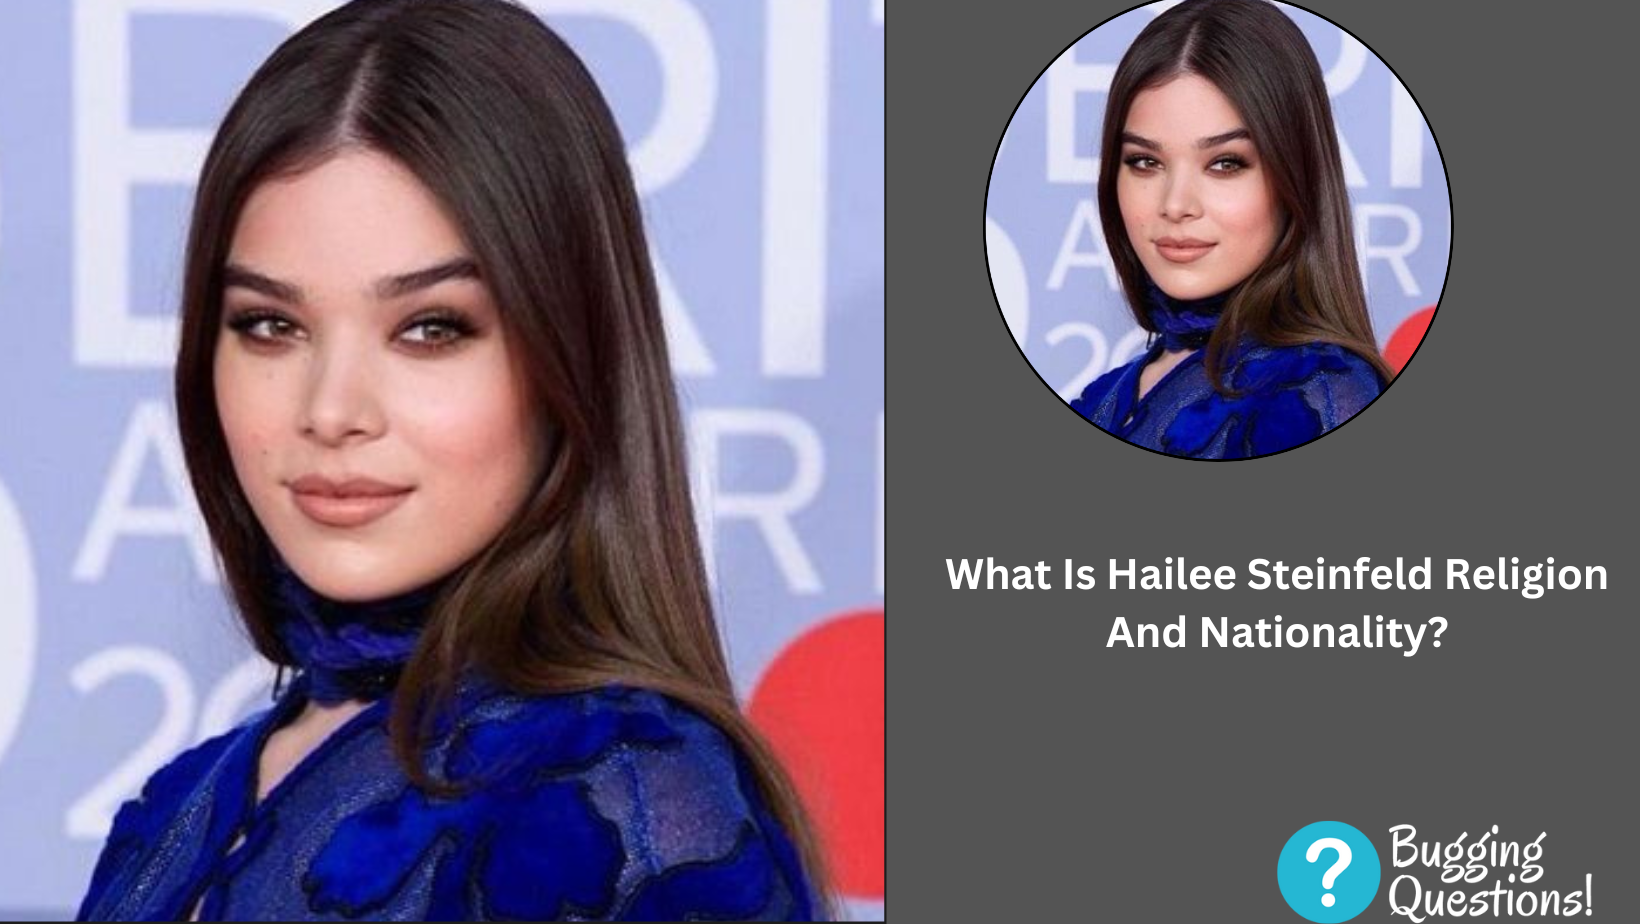 What Is Hailee Steinfeld Religion And Nationality?